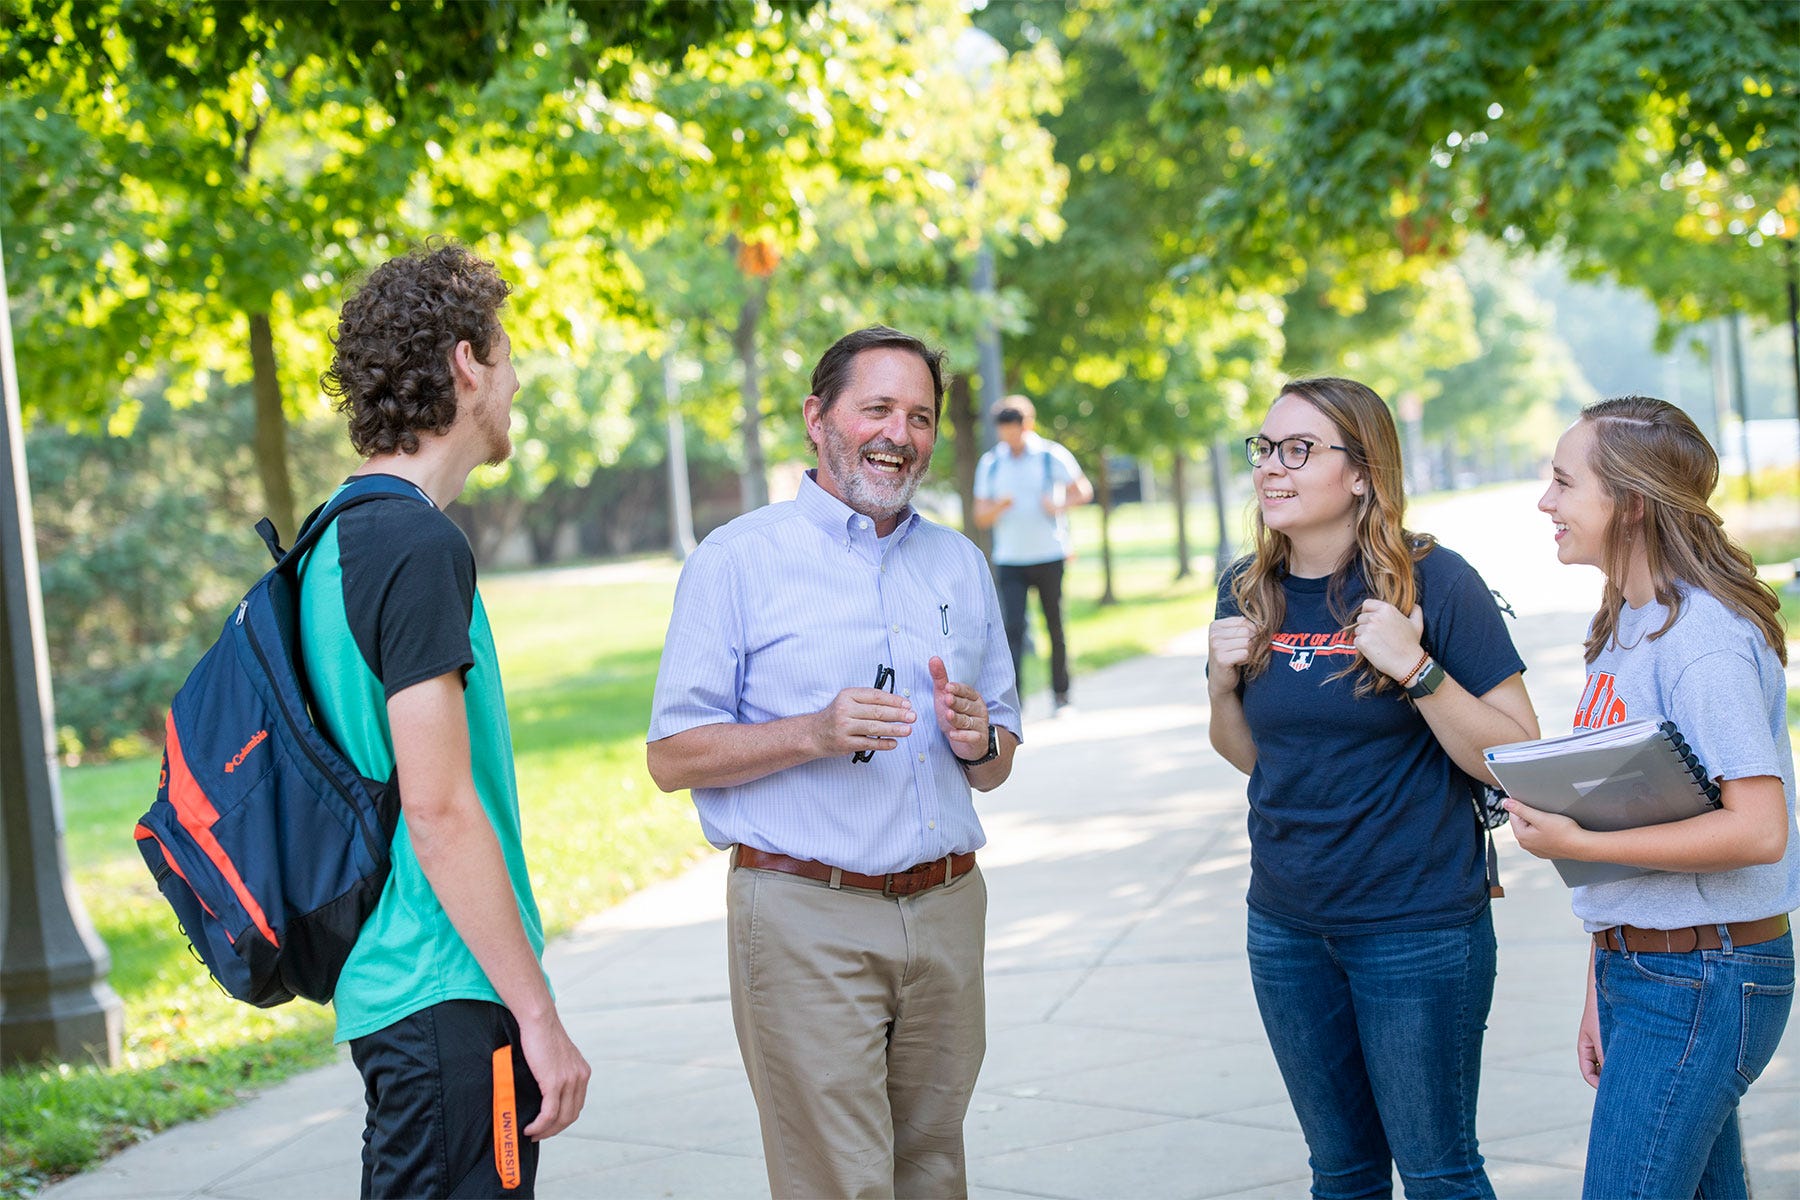 Germán Bollero talks with 3 college students on the University of Illinois campus